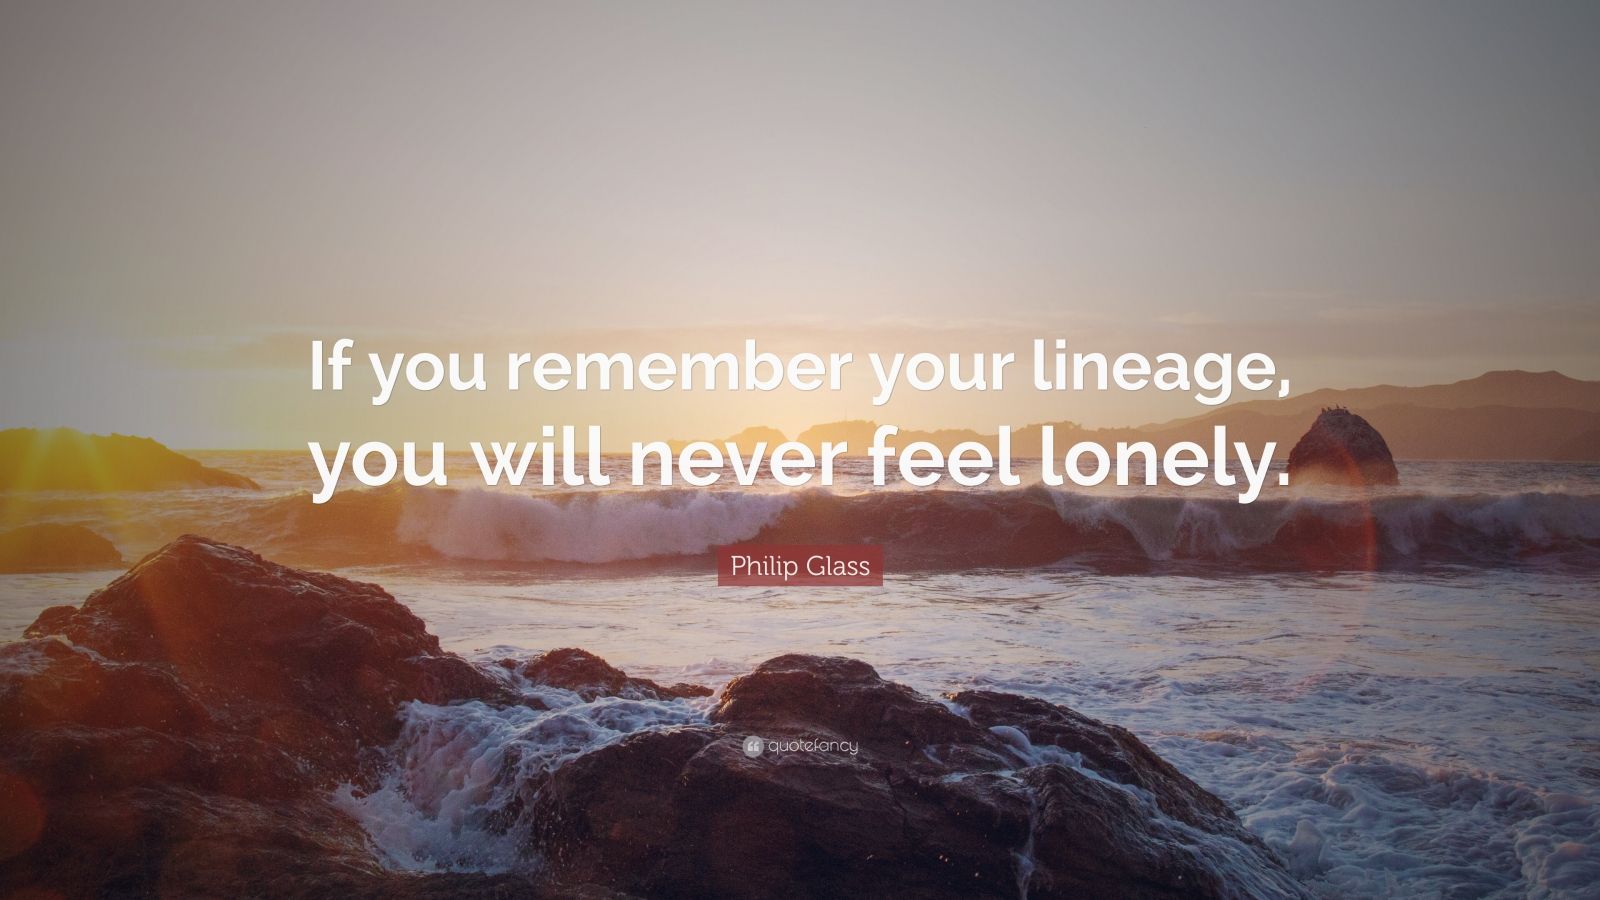 Philip Glass Quote: “If you remember your lineage, you will never feel ...